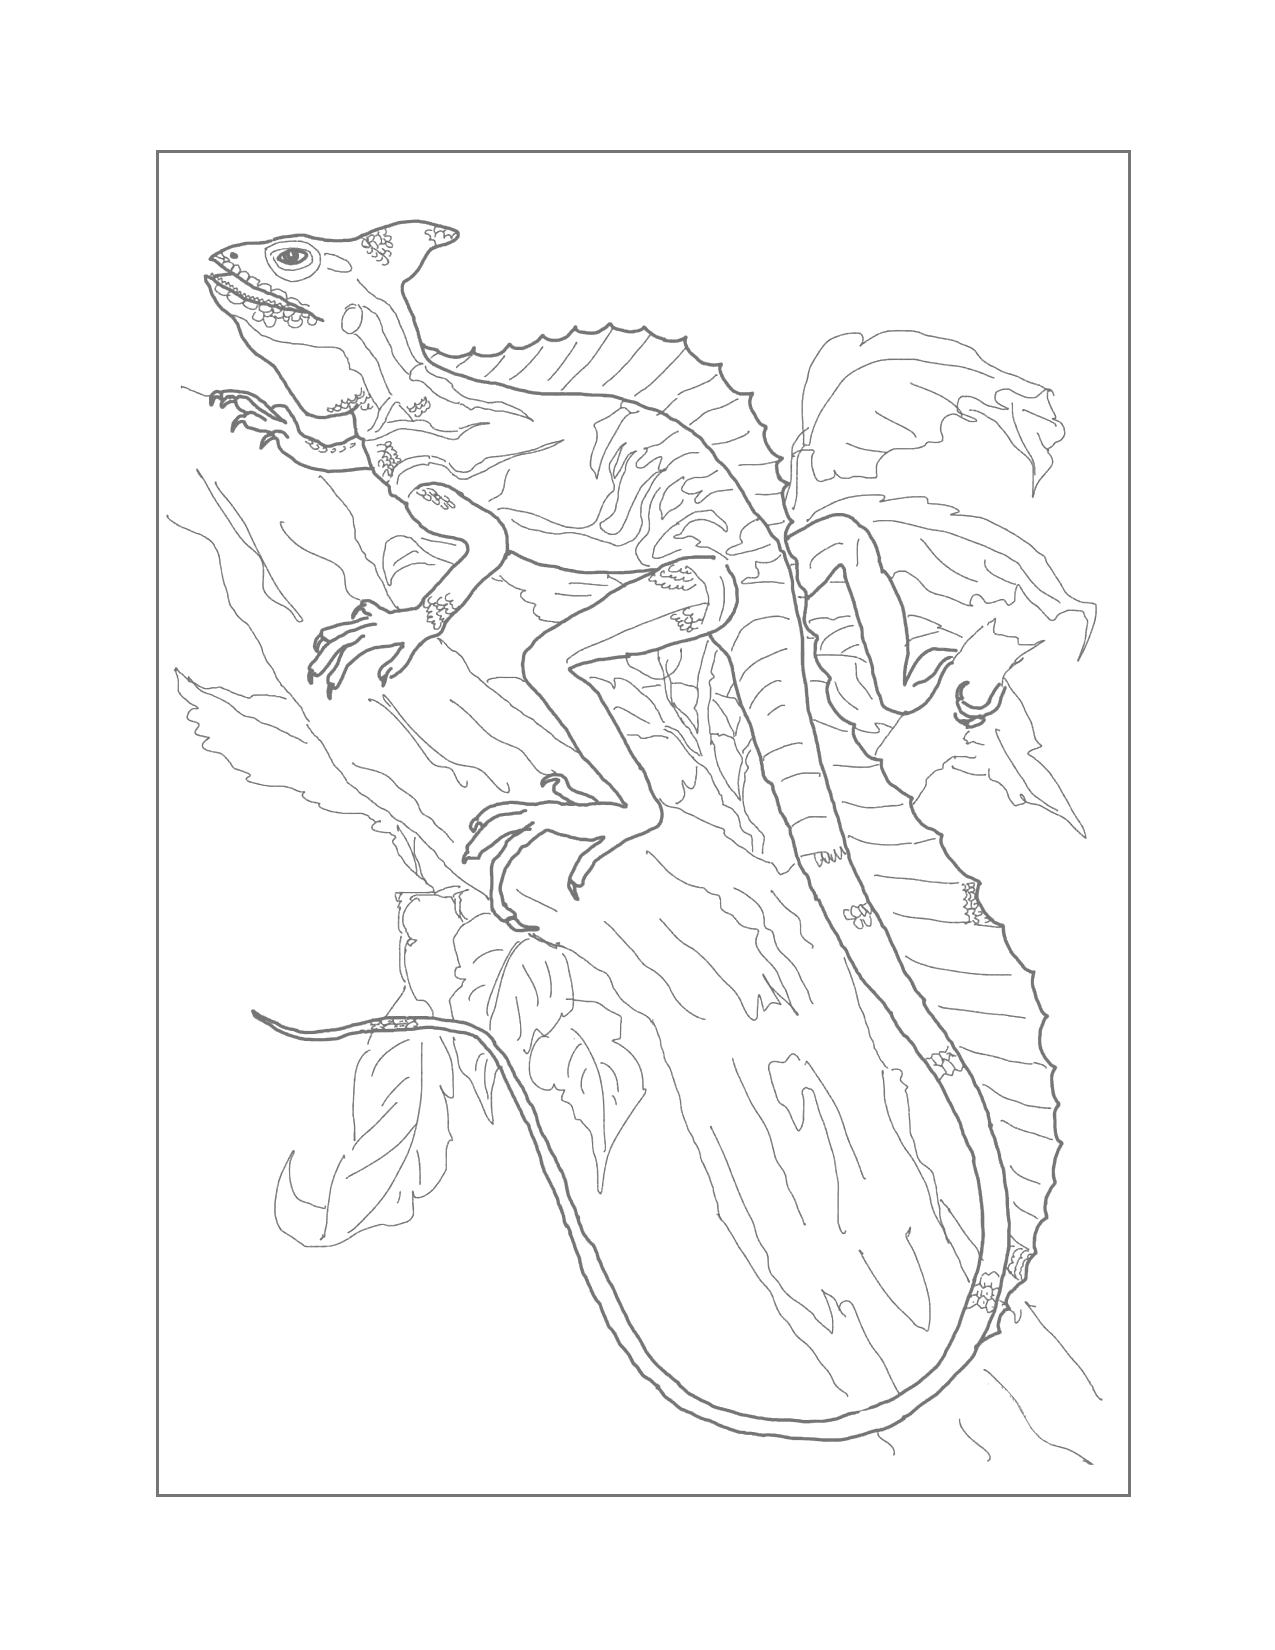 Green Basilisk Lizard Traceable Coloring Page